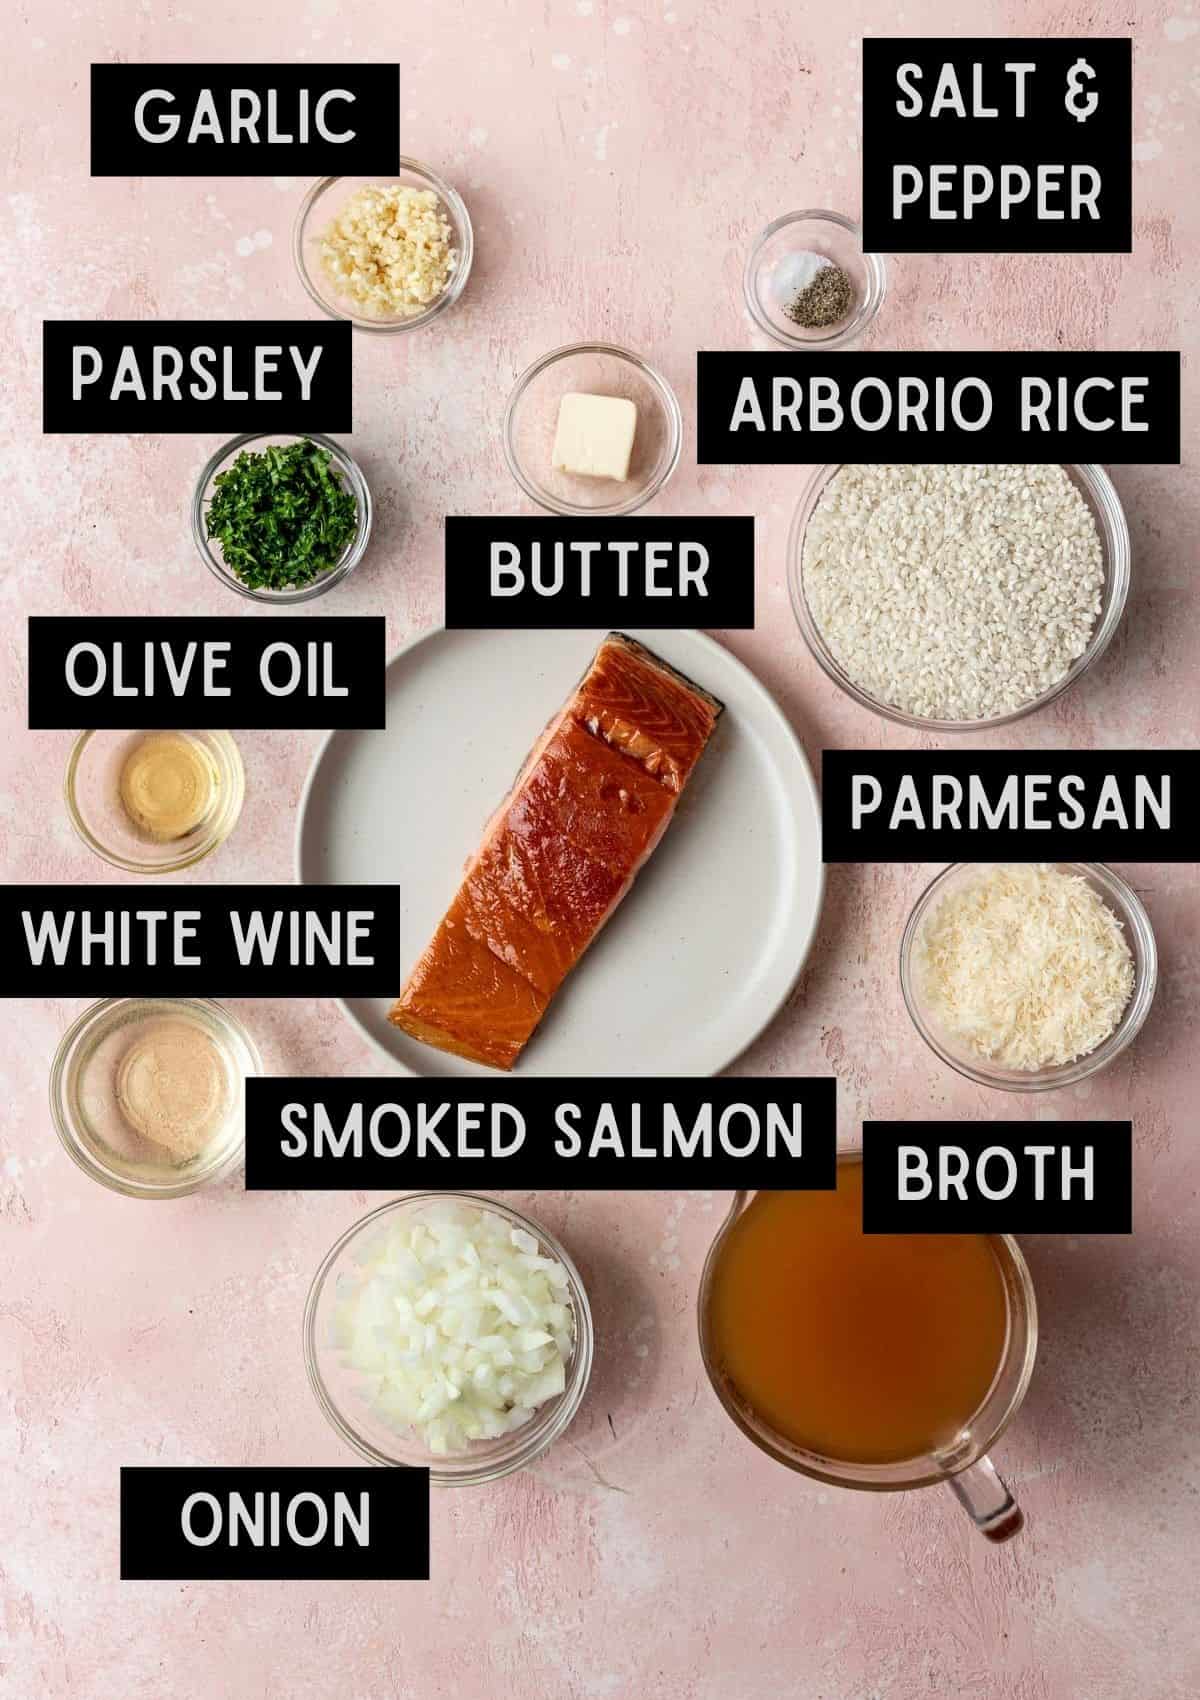 Labelled ingredients for smoked salmon risotto (see recipe for details).